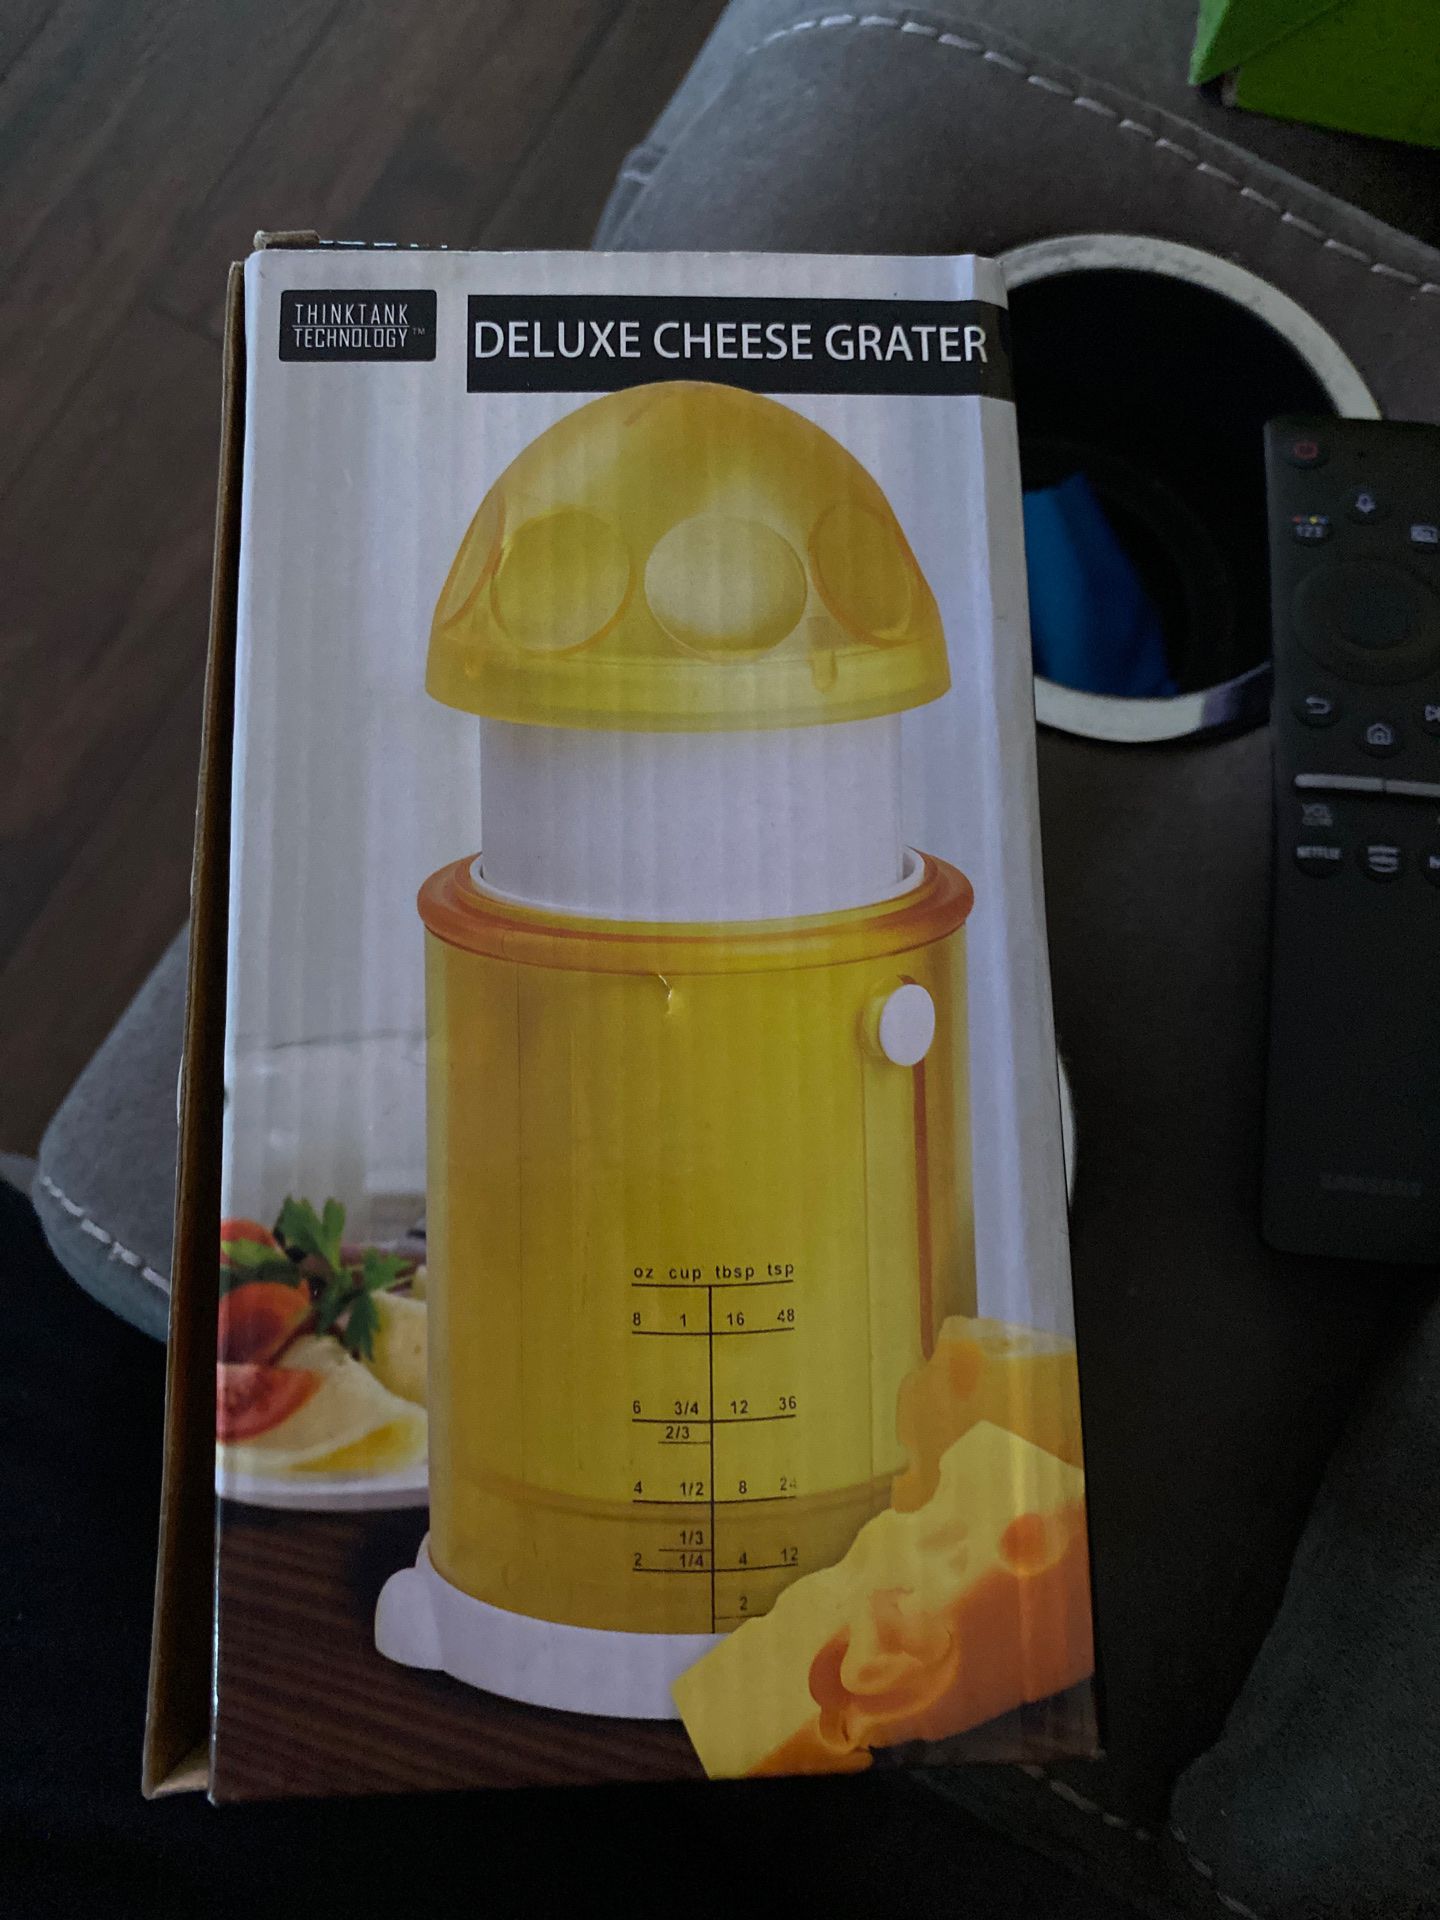 Deluxe cheese grater.